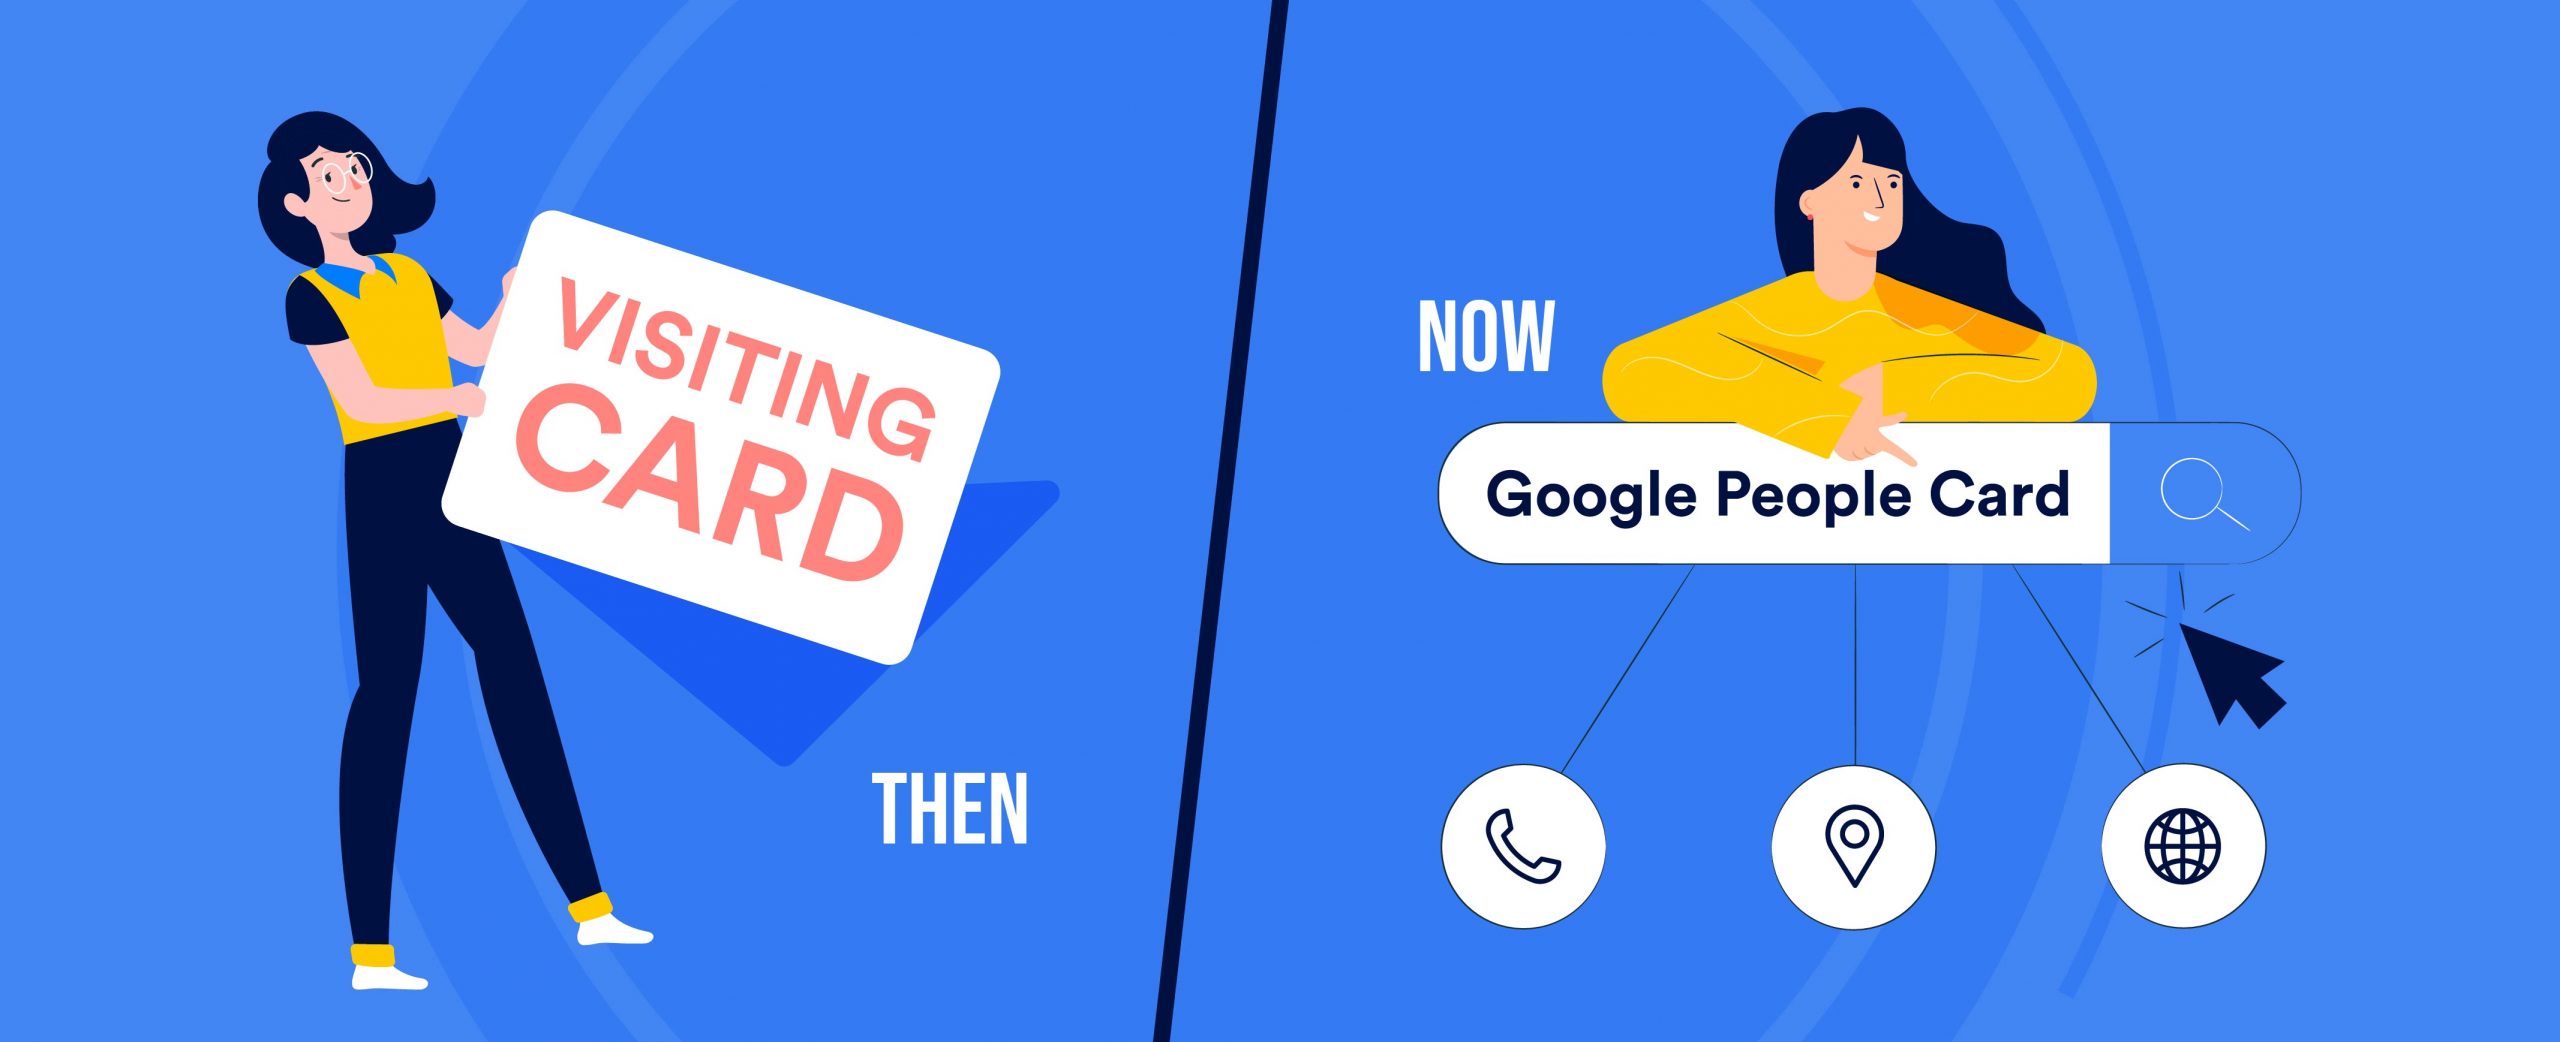 Google People Cards & How It Will Replace Visiting Cards